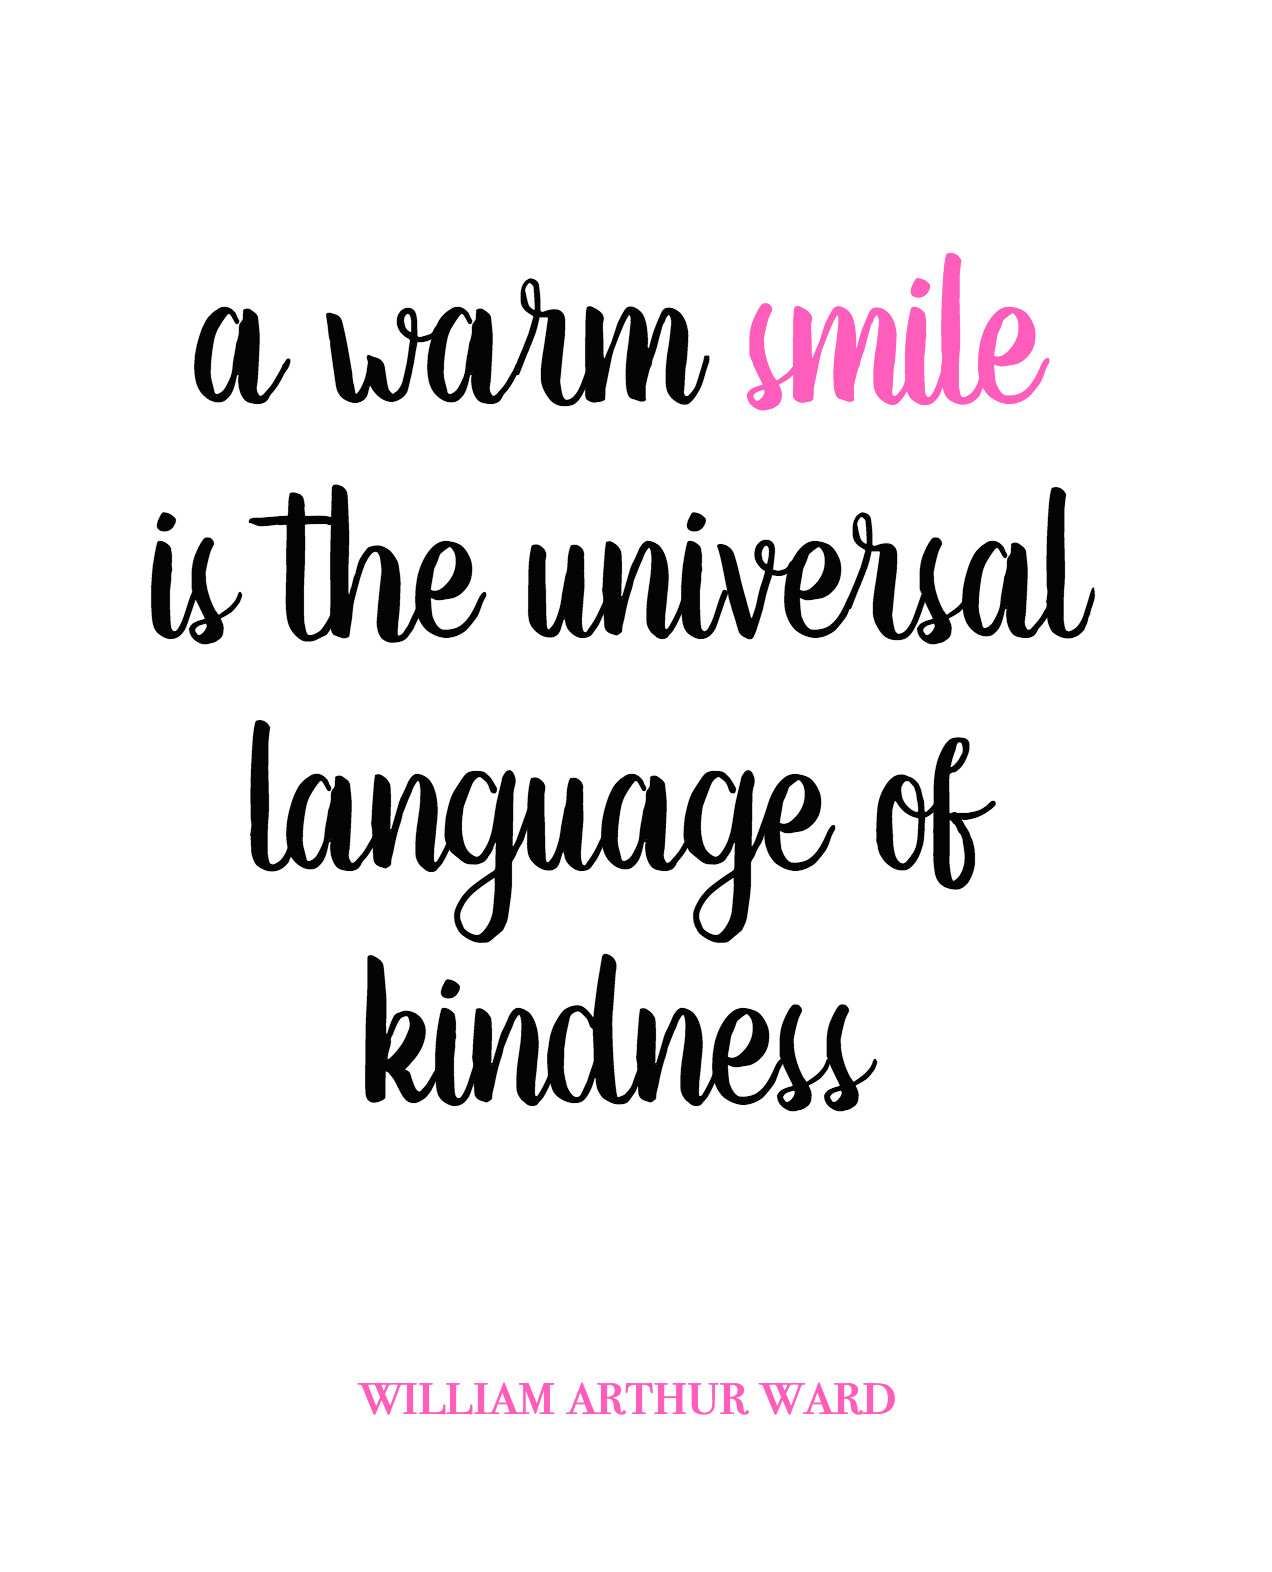 Smile Motivational Quotes
 5 Ways Your Digital Influence Can Make a Difference